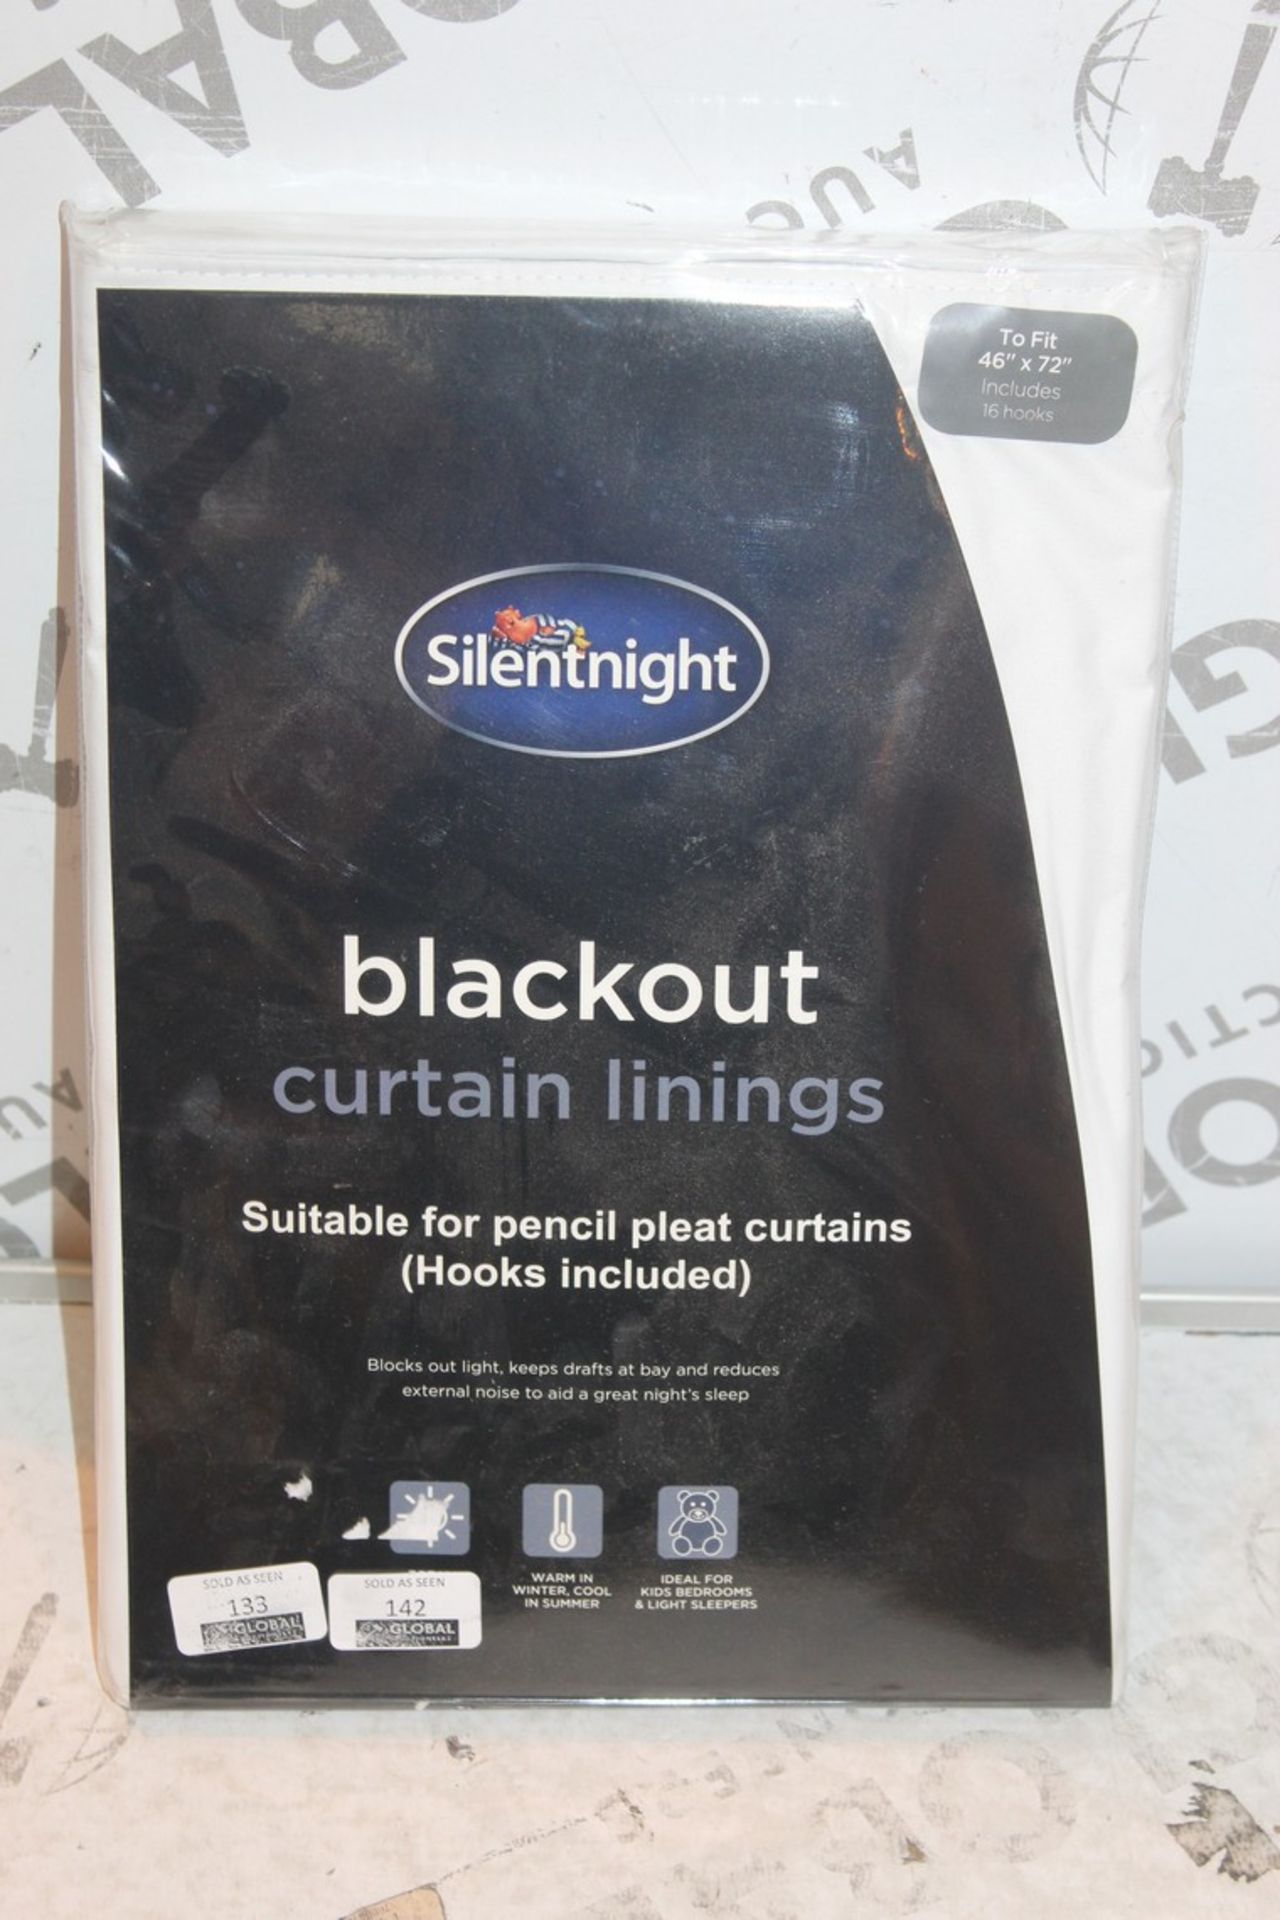 Brand New Pair Silent Night 46 x 72in Blackout Curtain Linings (Public Viewings & Appraisals